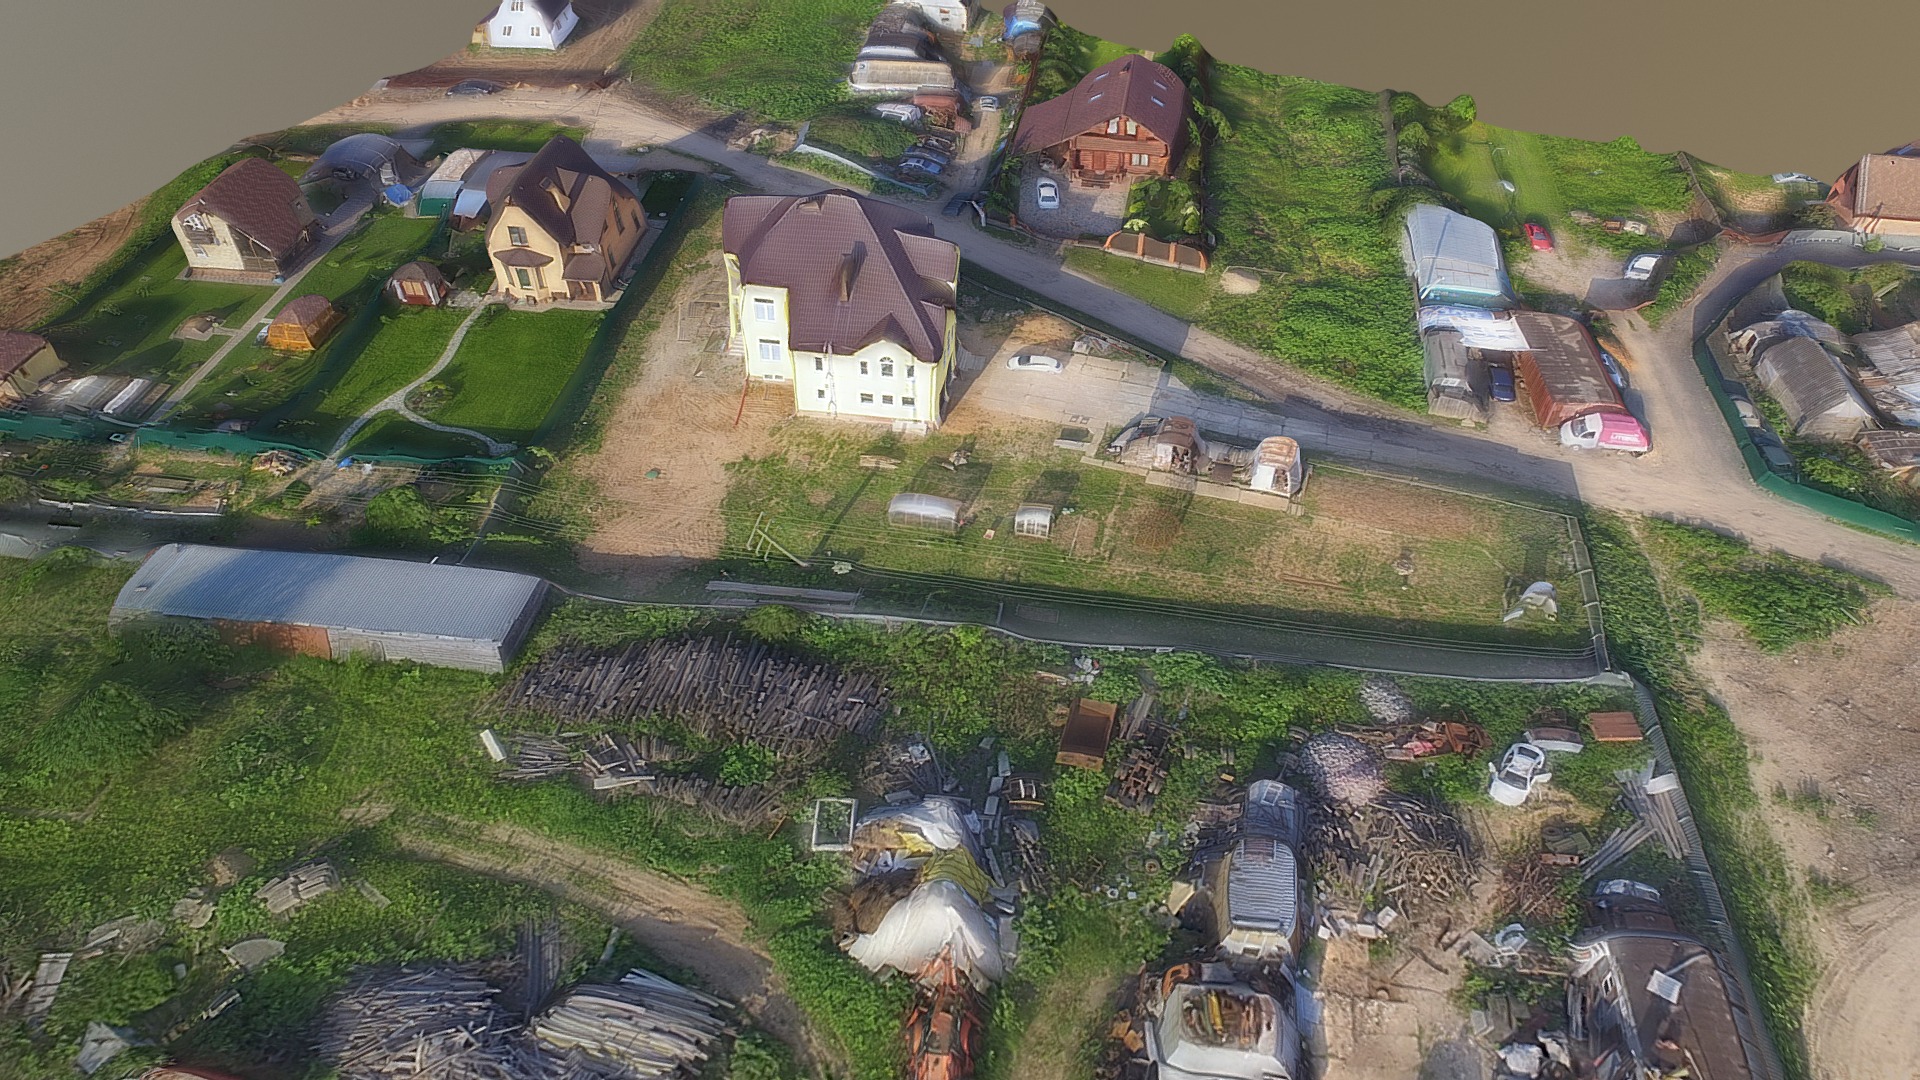 3D model Жостово - This is a 3D model of the Жостово. The 3D model is about aerial view of a small town.